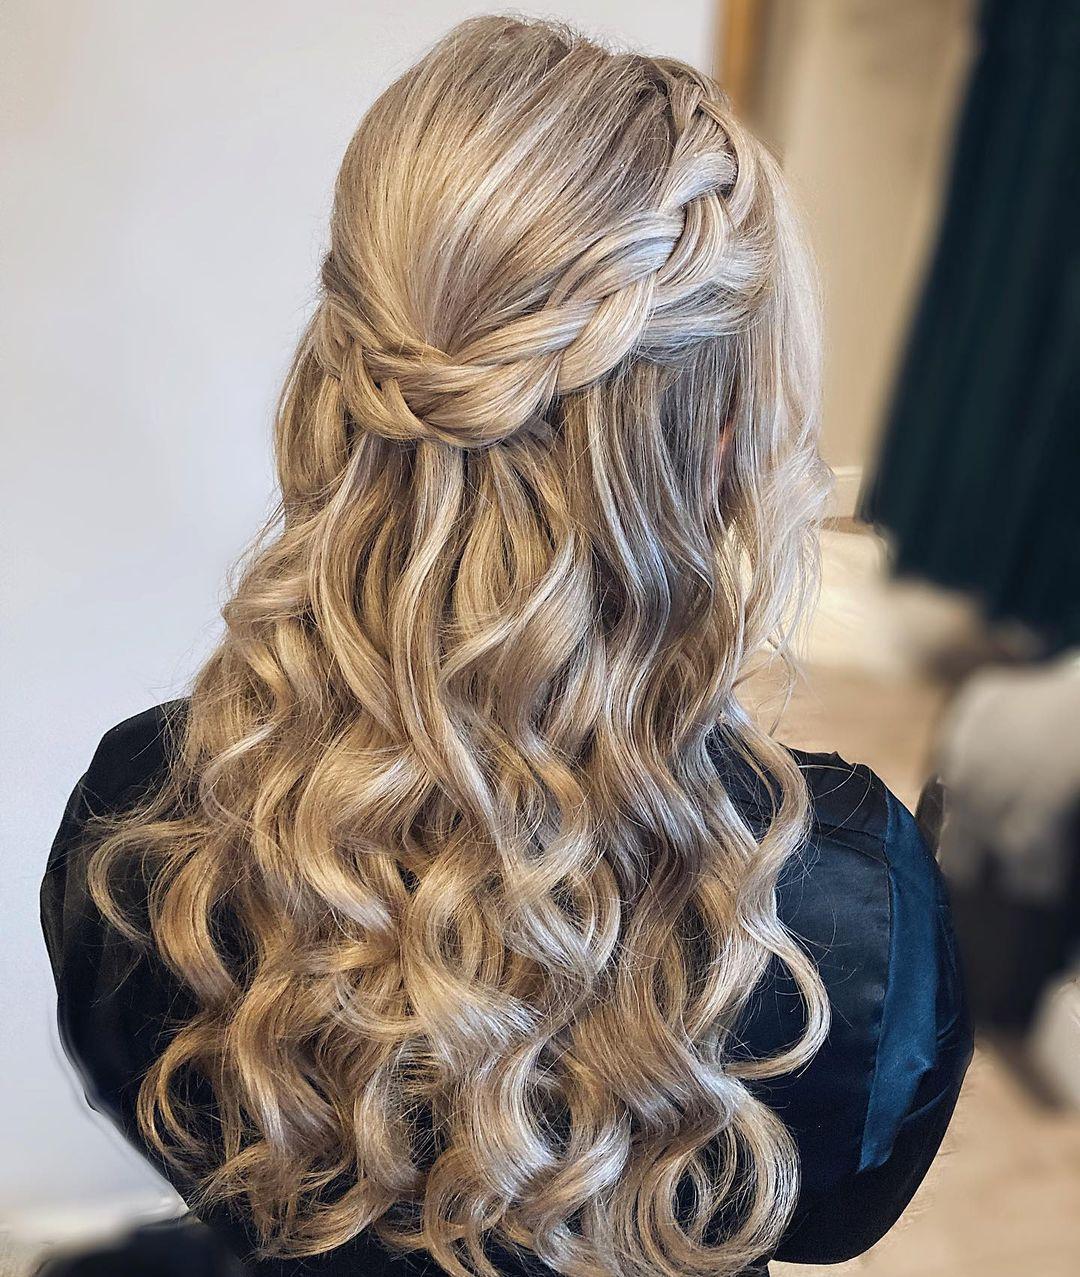 Half Up Half Down Wedding Hair: 28 Real Bridal Hairstyles You'll Want to Copy - hitched.co.uk - hitched.co.uk